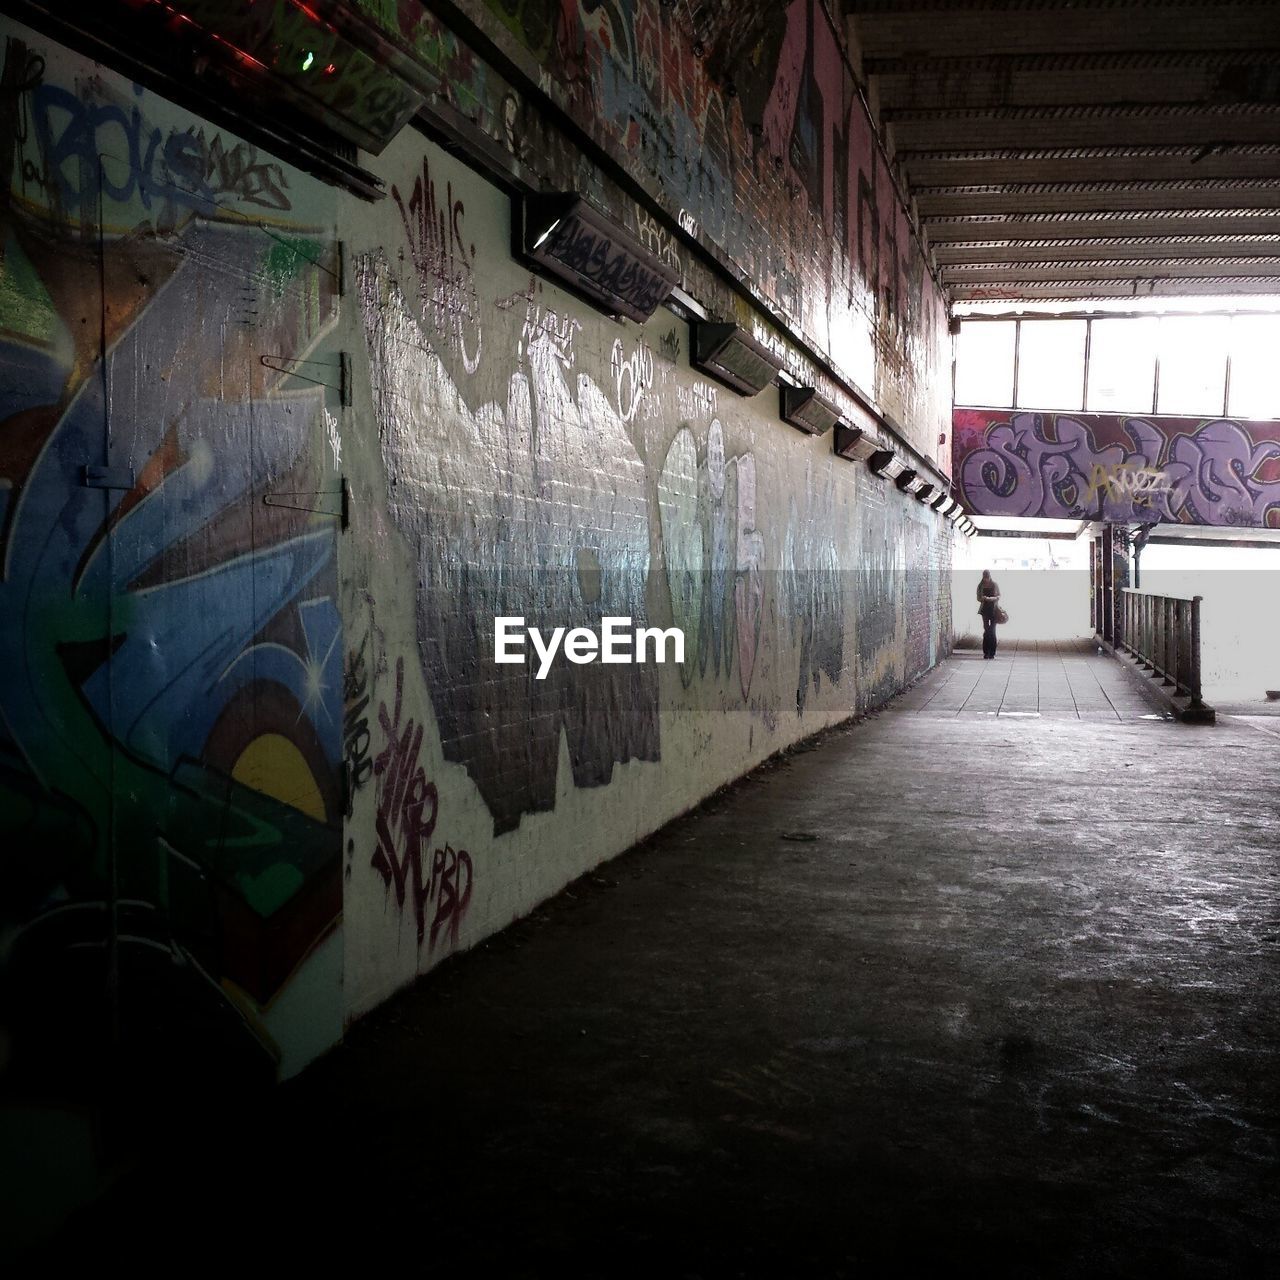 Interior of post-industrial building covered in graffiti